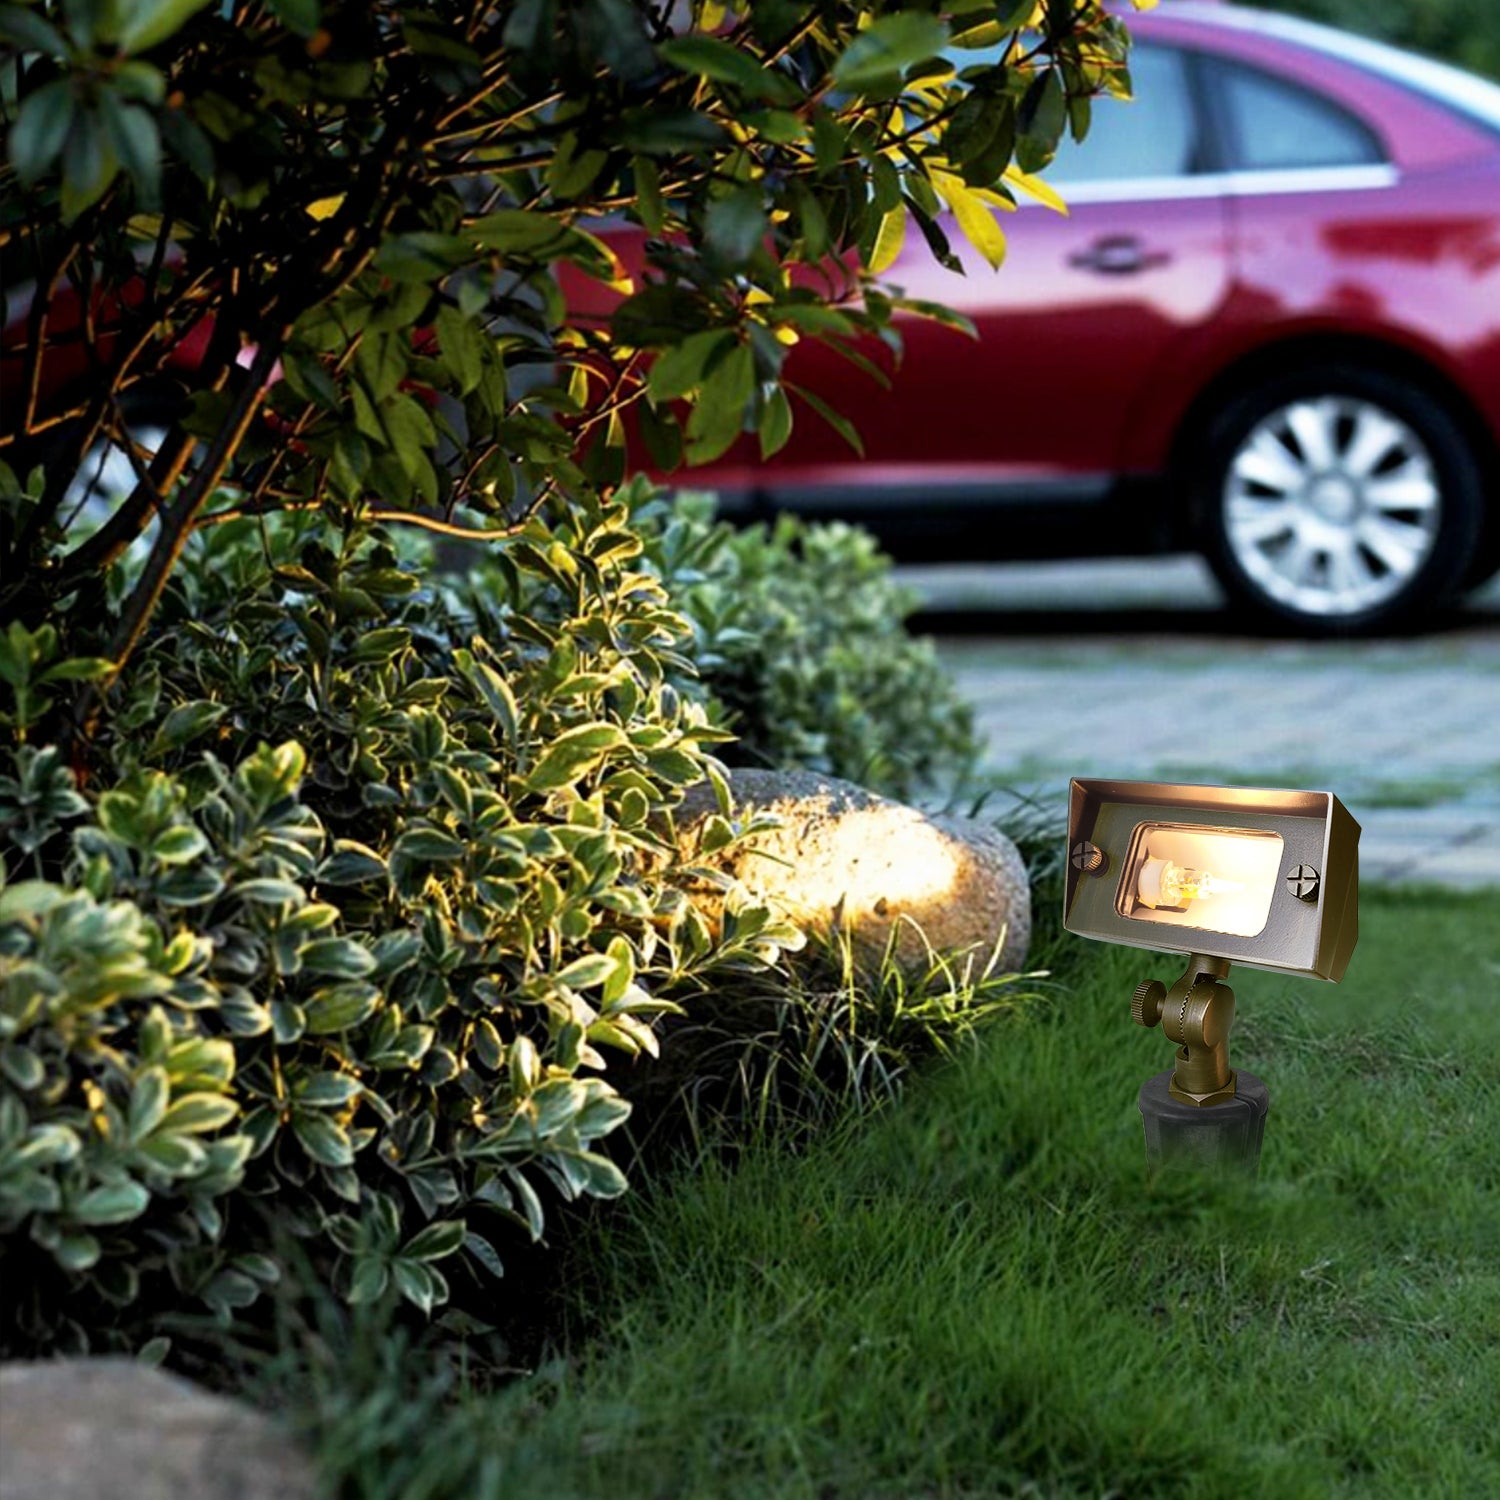 Brass outdoor rectangular flood light illuminating garden plants with a red car in the background. Ideal for highlighting landscape features.